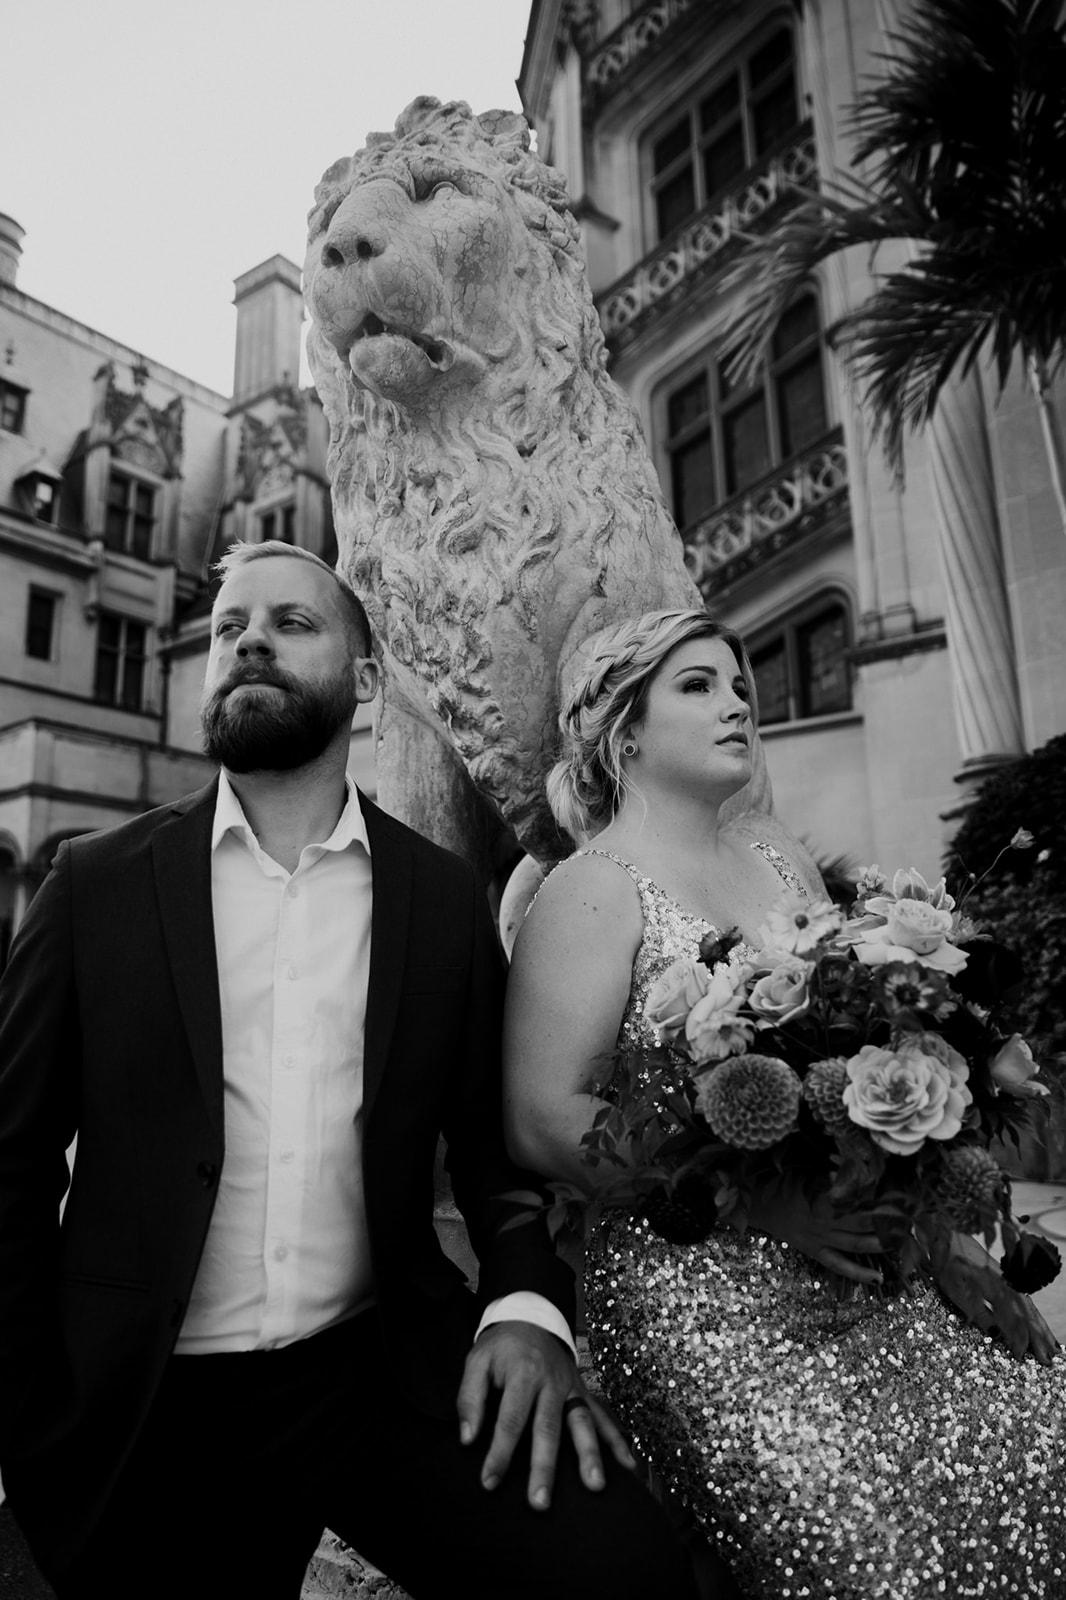 Couple standing side by side with hugh lion head in the background.